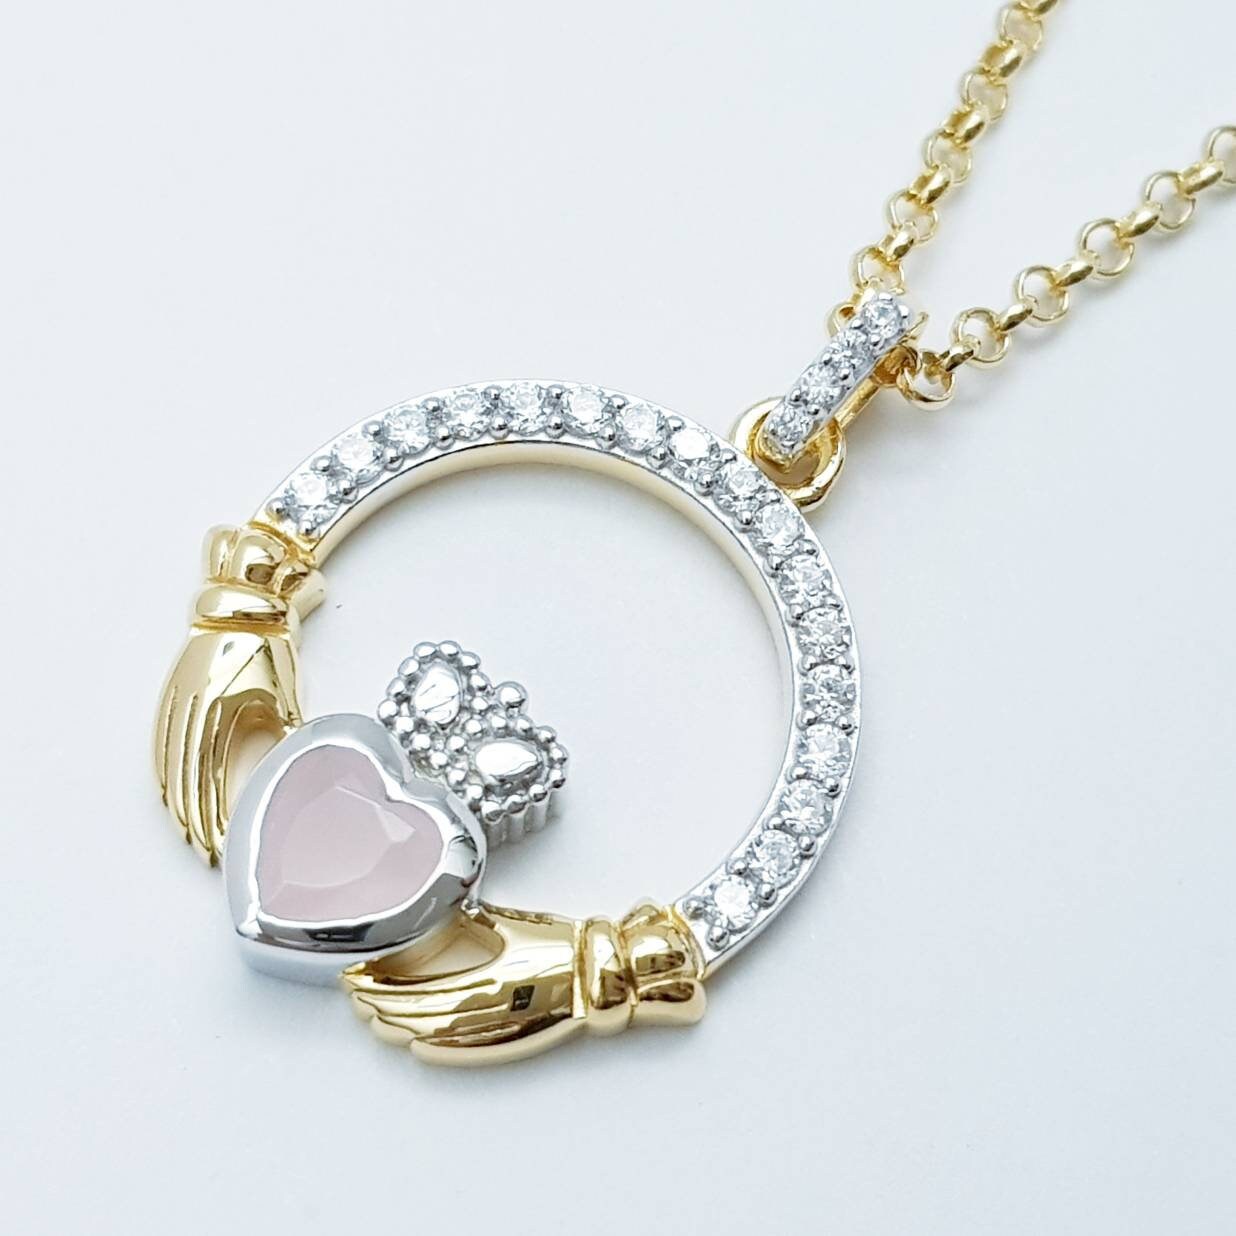 Baby pink Claddagh pendant, Irish claddagh necklace from Galway, Ireland, Angel wing claddagh chain